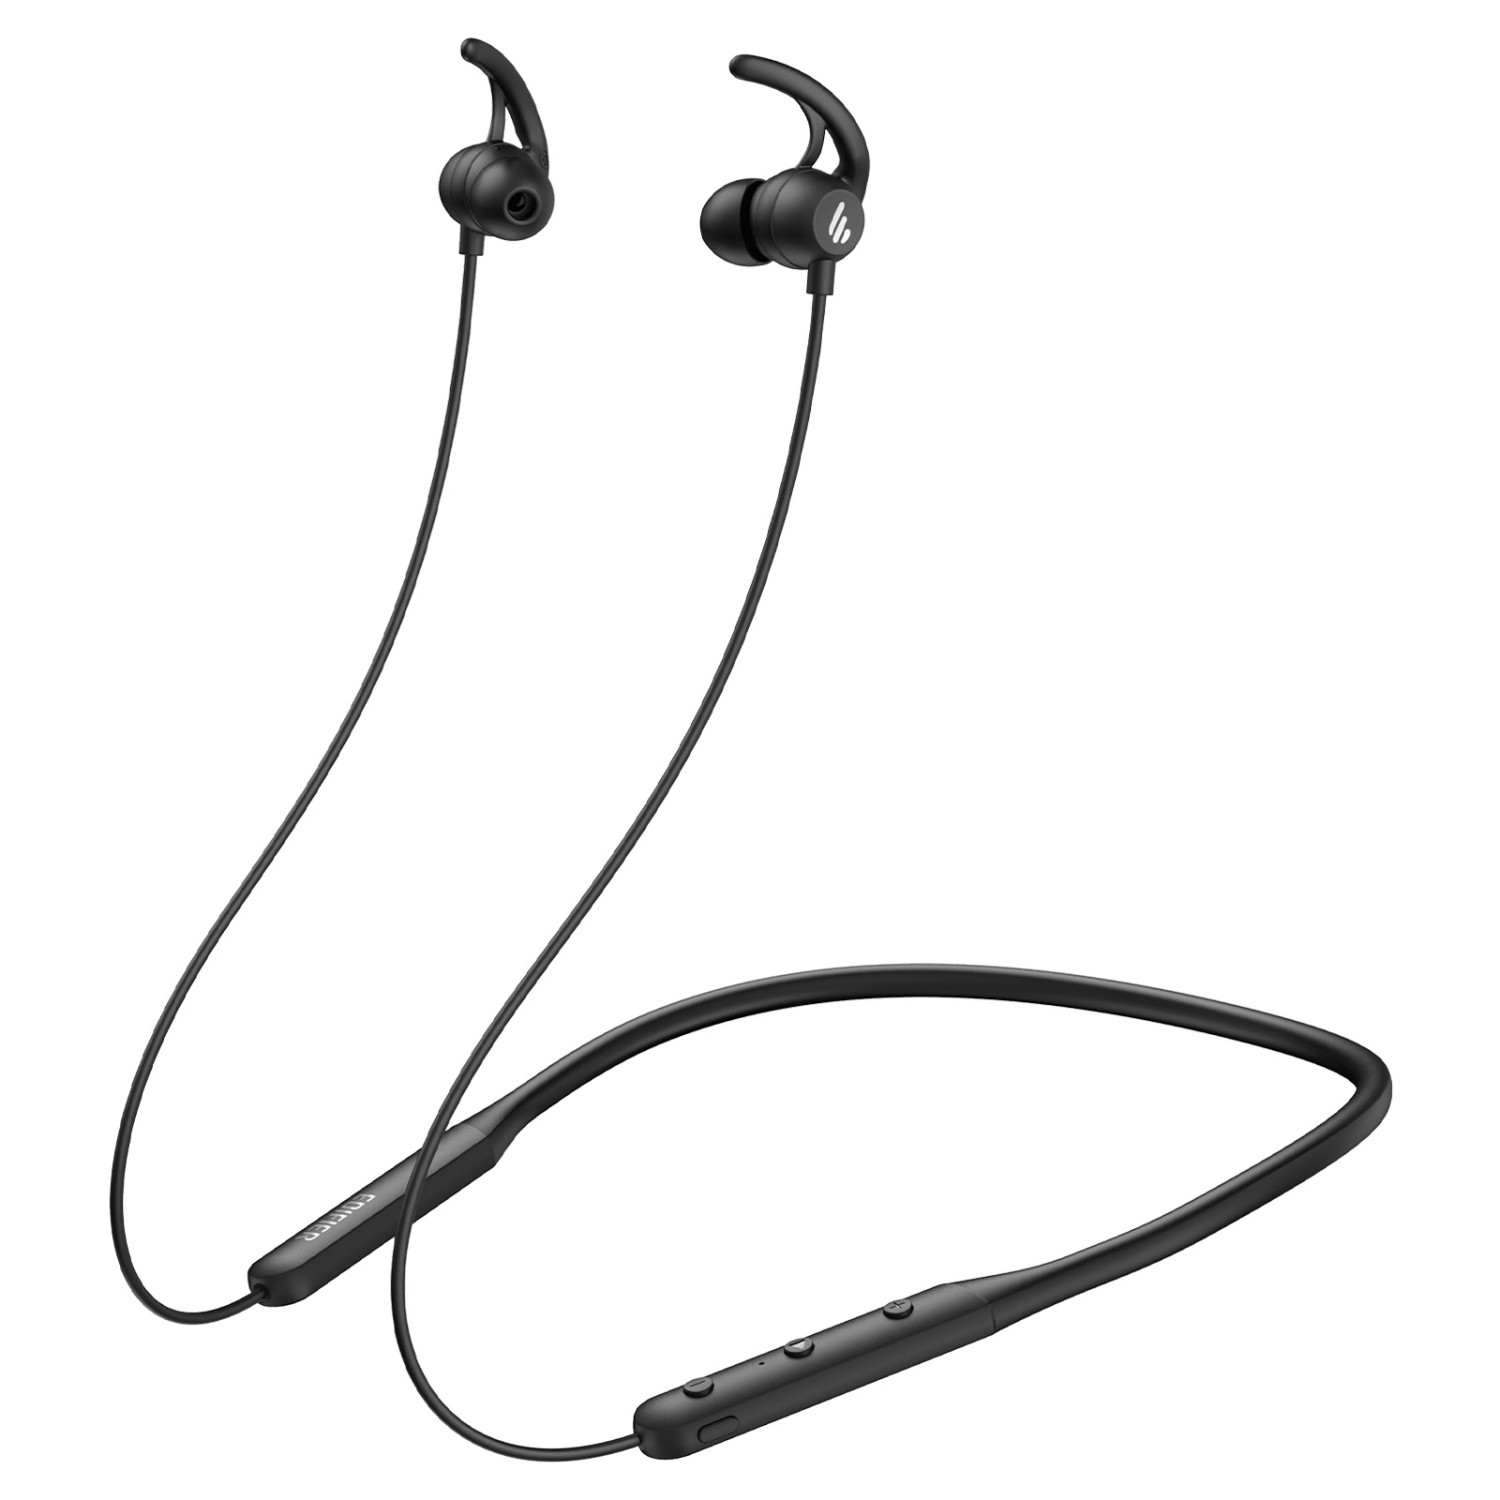 Edifier W280NB Bluetooth Wireless Active Noise Cancelling Earbuds, Neckband Headphones 13Hrs Playtime, IP55 Waterproof Stereo Earphones for Gym, Compatible with iPhone and Android.